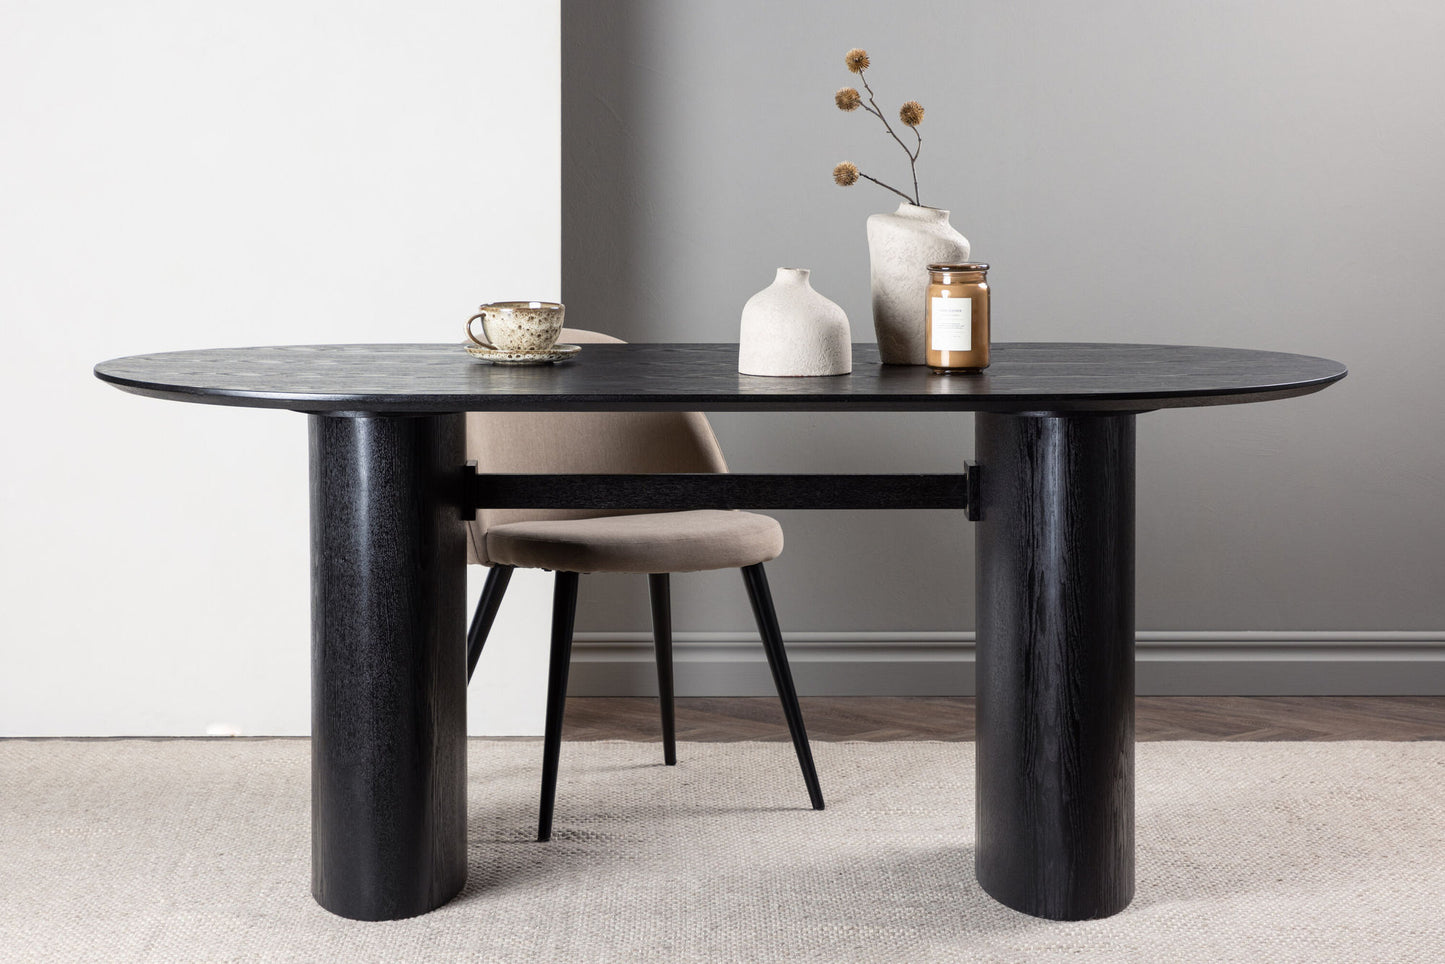 Isolde dining room table oval black